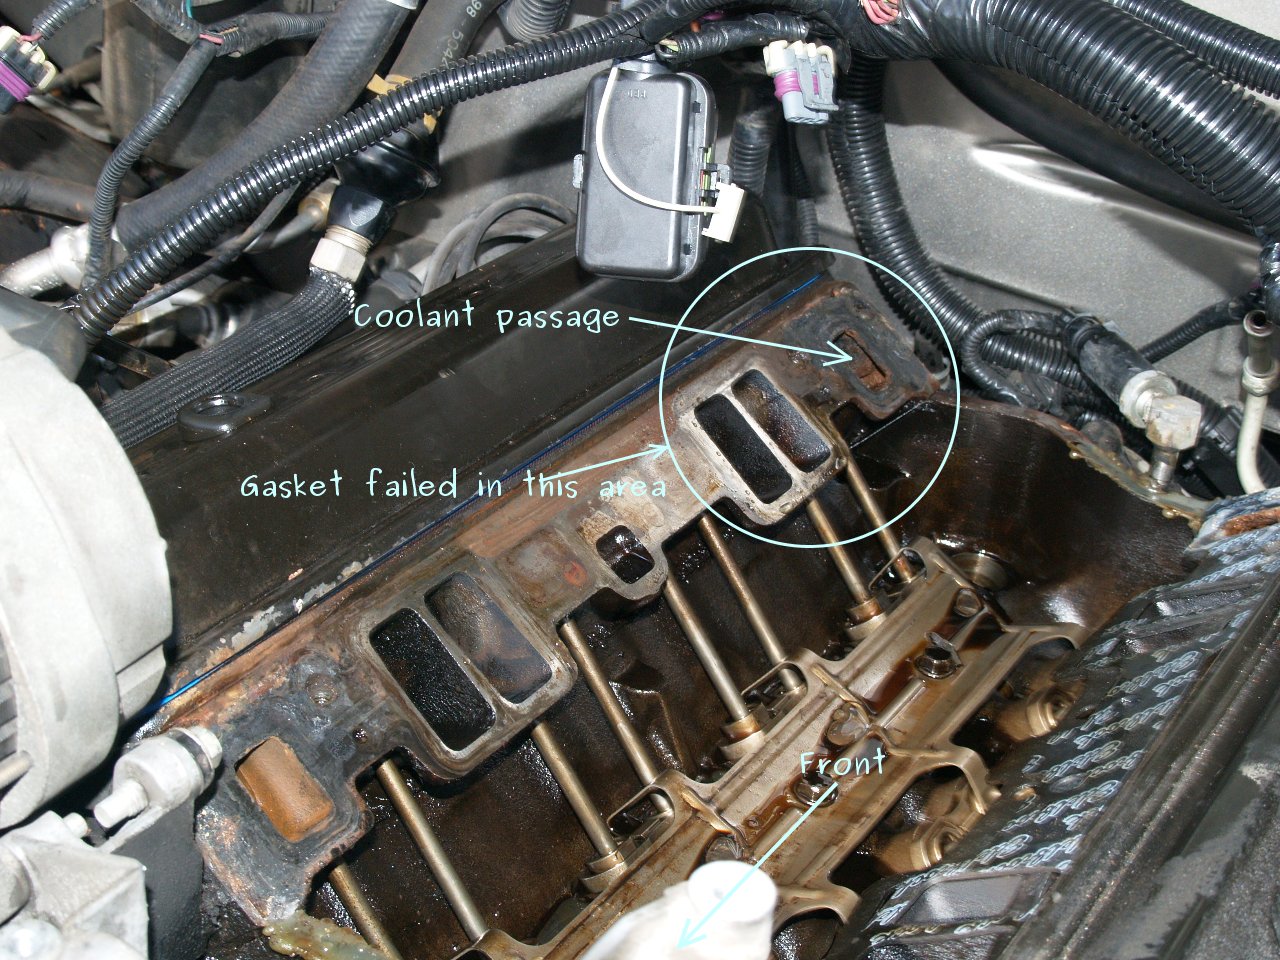 See B2011 in engine